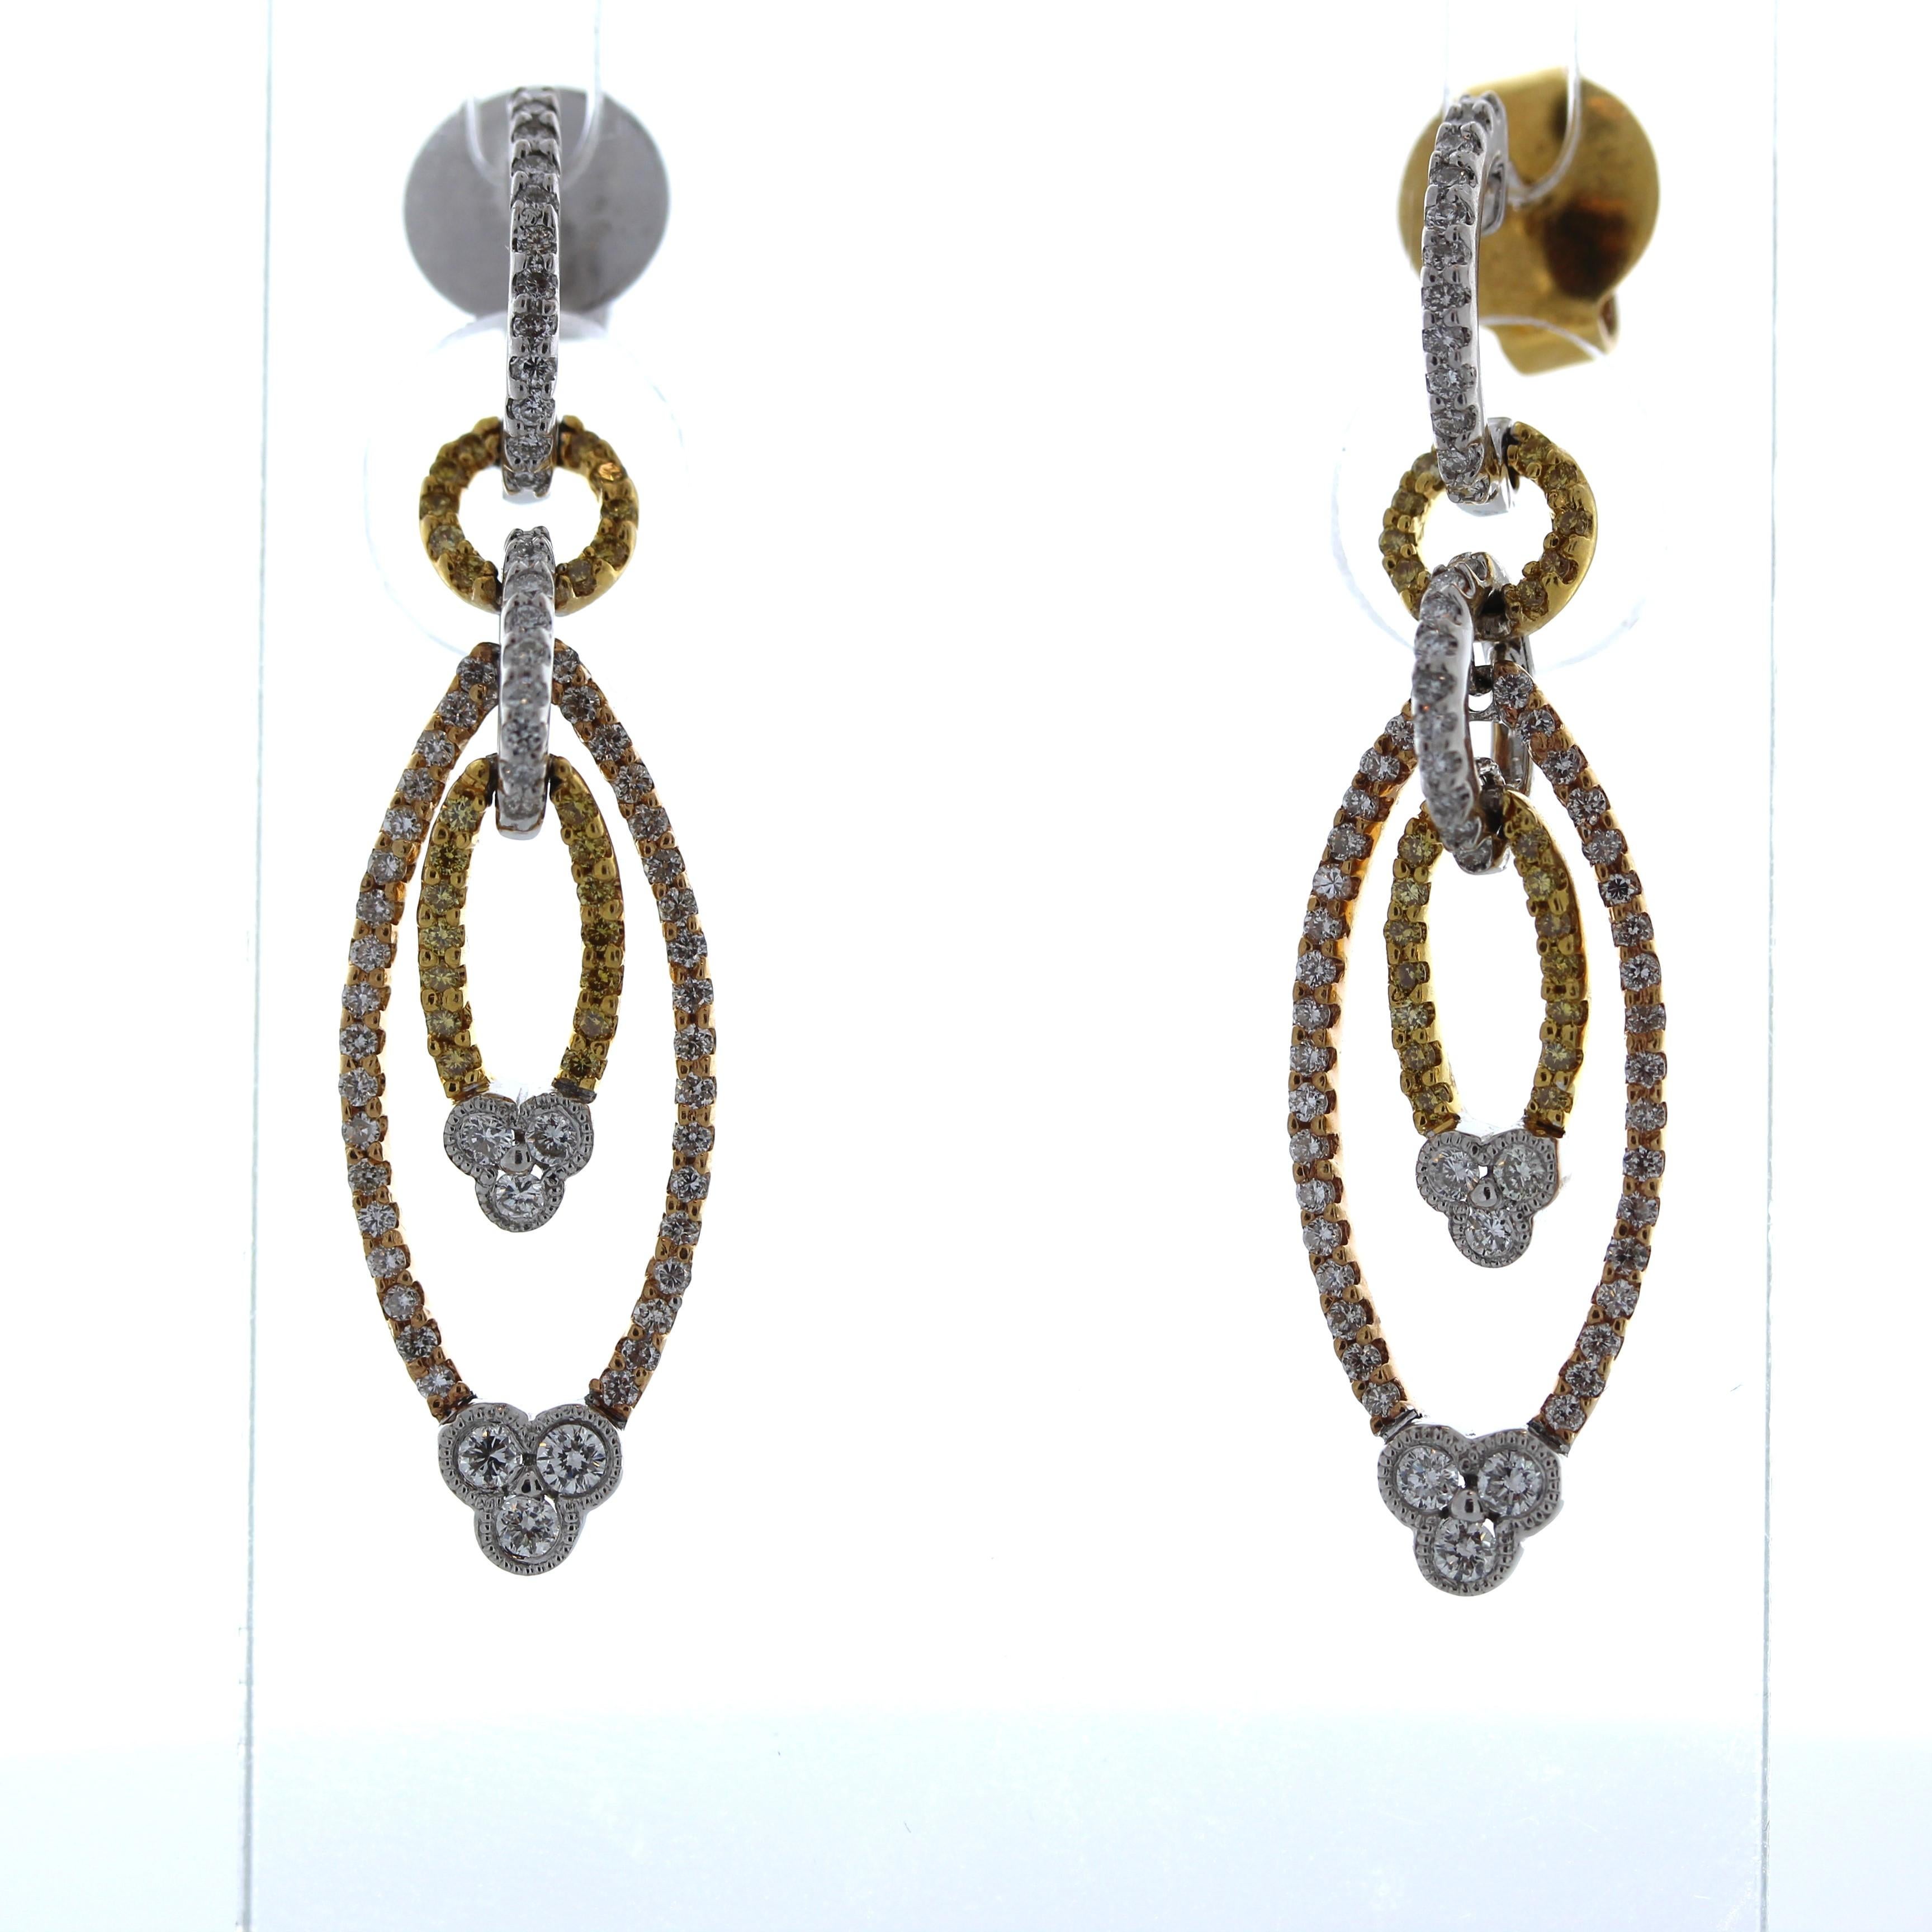 Earrings made of 18k white gold or yellow gold with a main stone of round-cut diamonds weighing 1.50 carats would be an exquisite and luxurious choice. The 18k gold provides a durable and lustrous base for the earrings, while the diamonds add